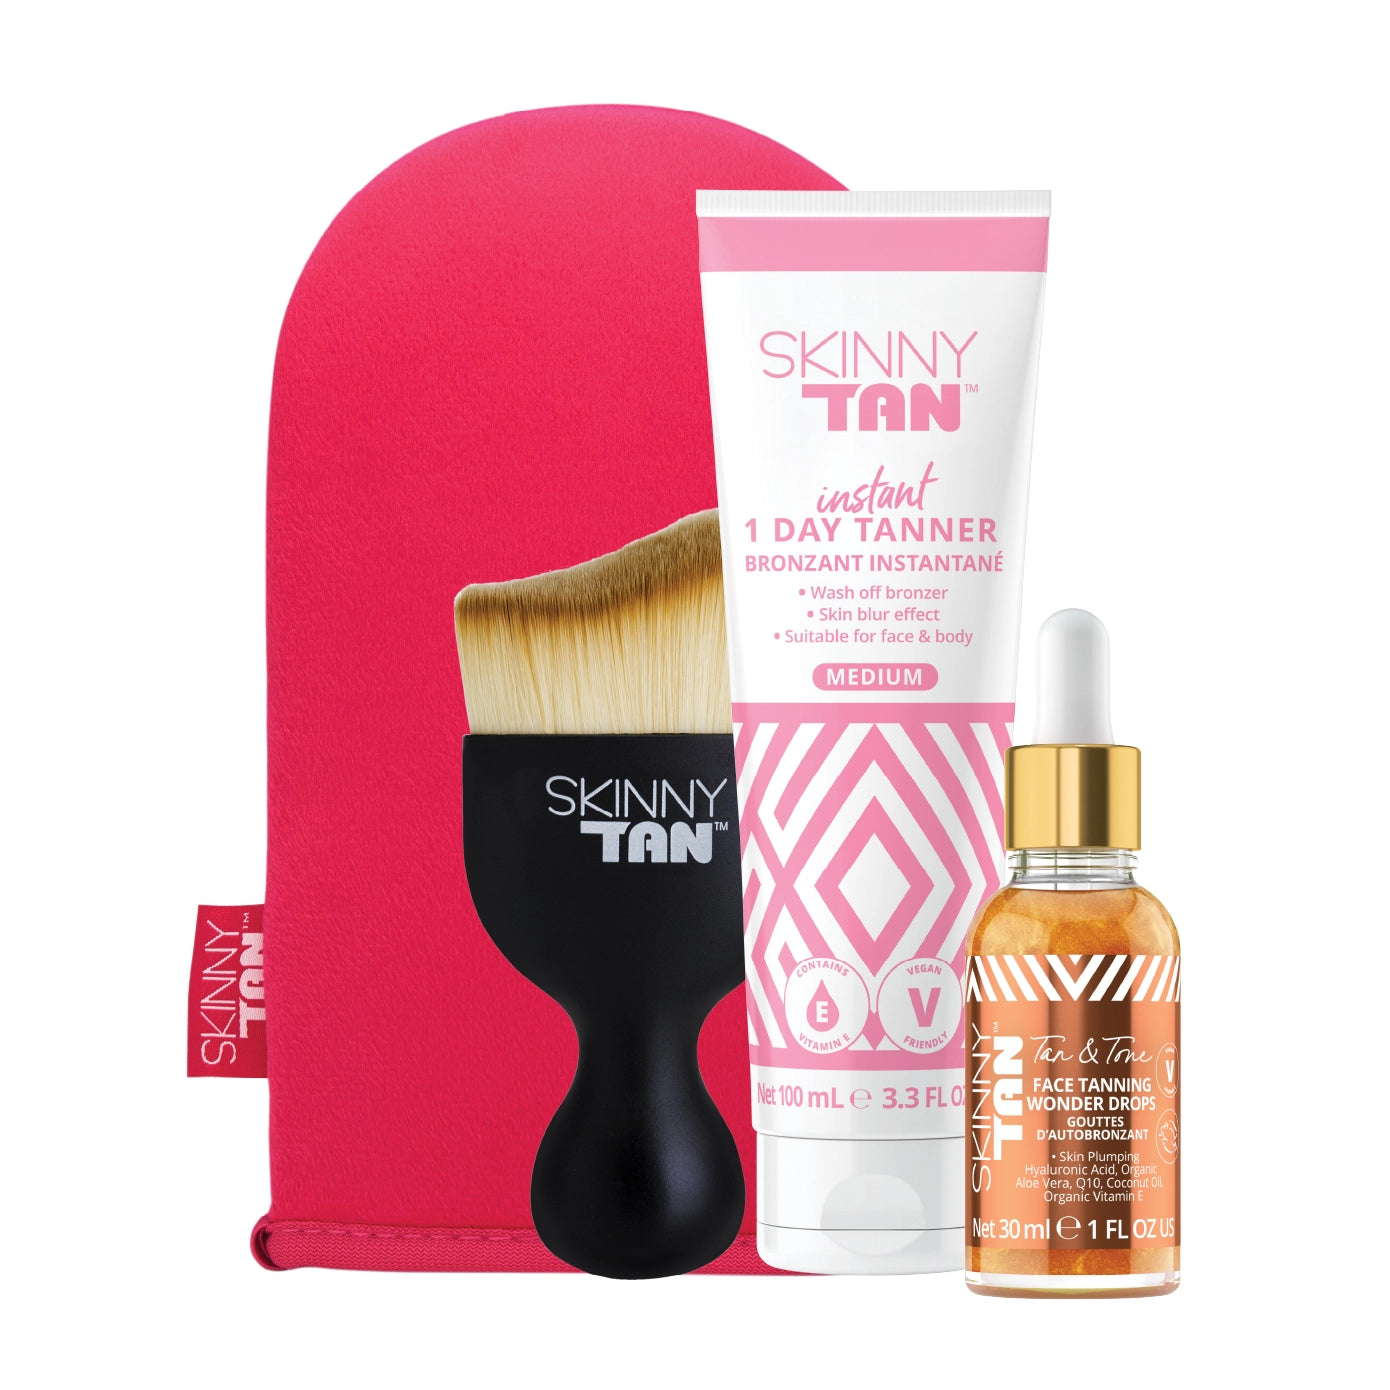 Tan in an instant bundle by Skinny Tan. Includes Instant 1 Day Tanner, Face tanning Wonder Drops, Miracle Brush and Pink Velvet Dual Tanning Mitt